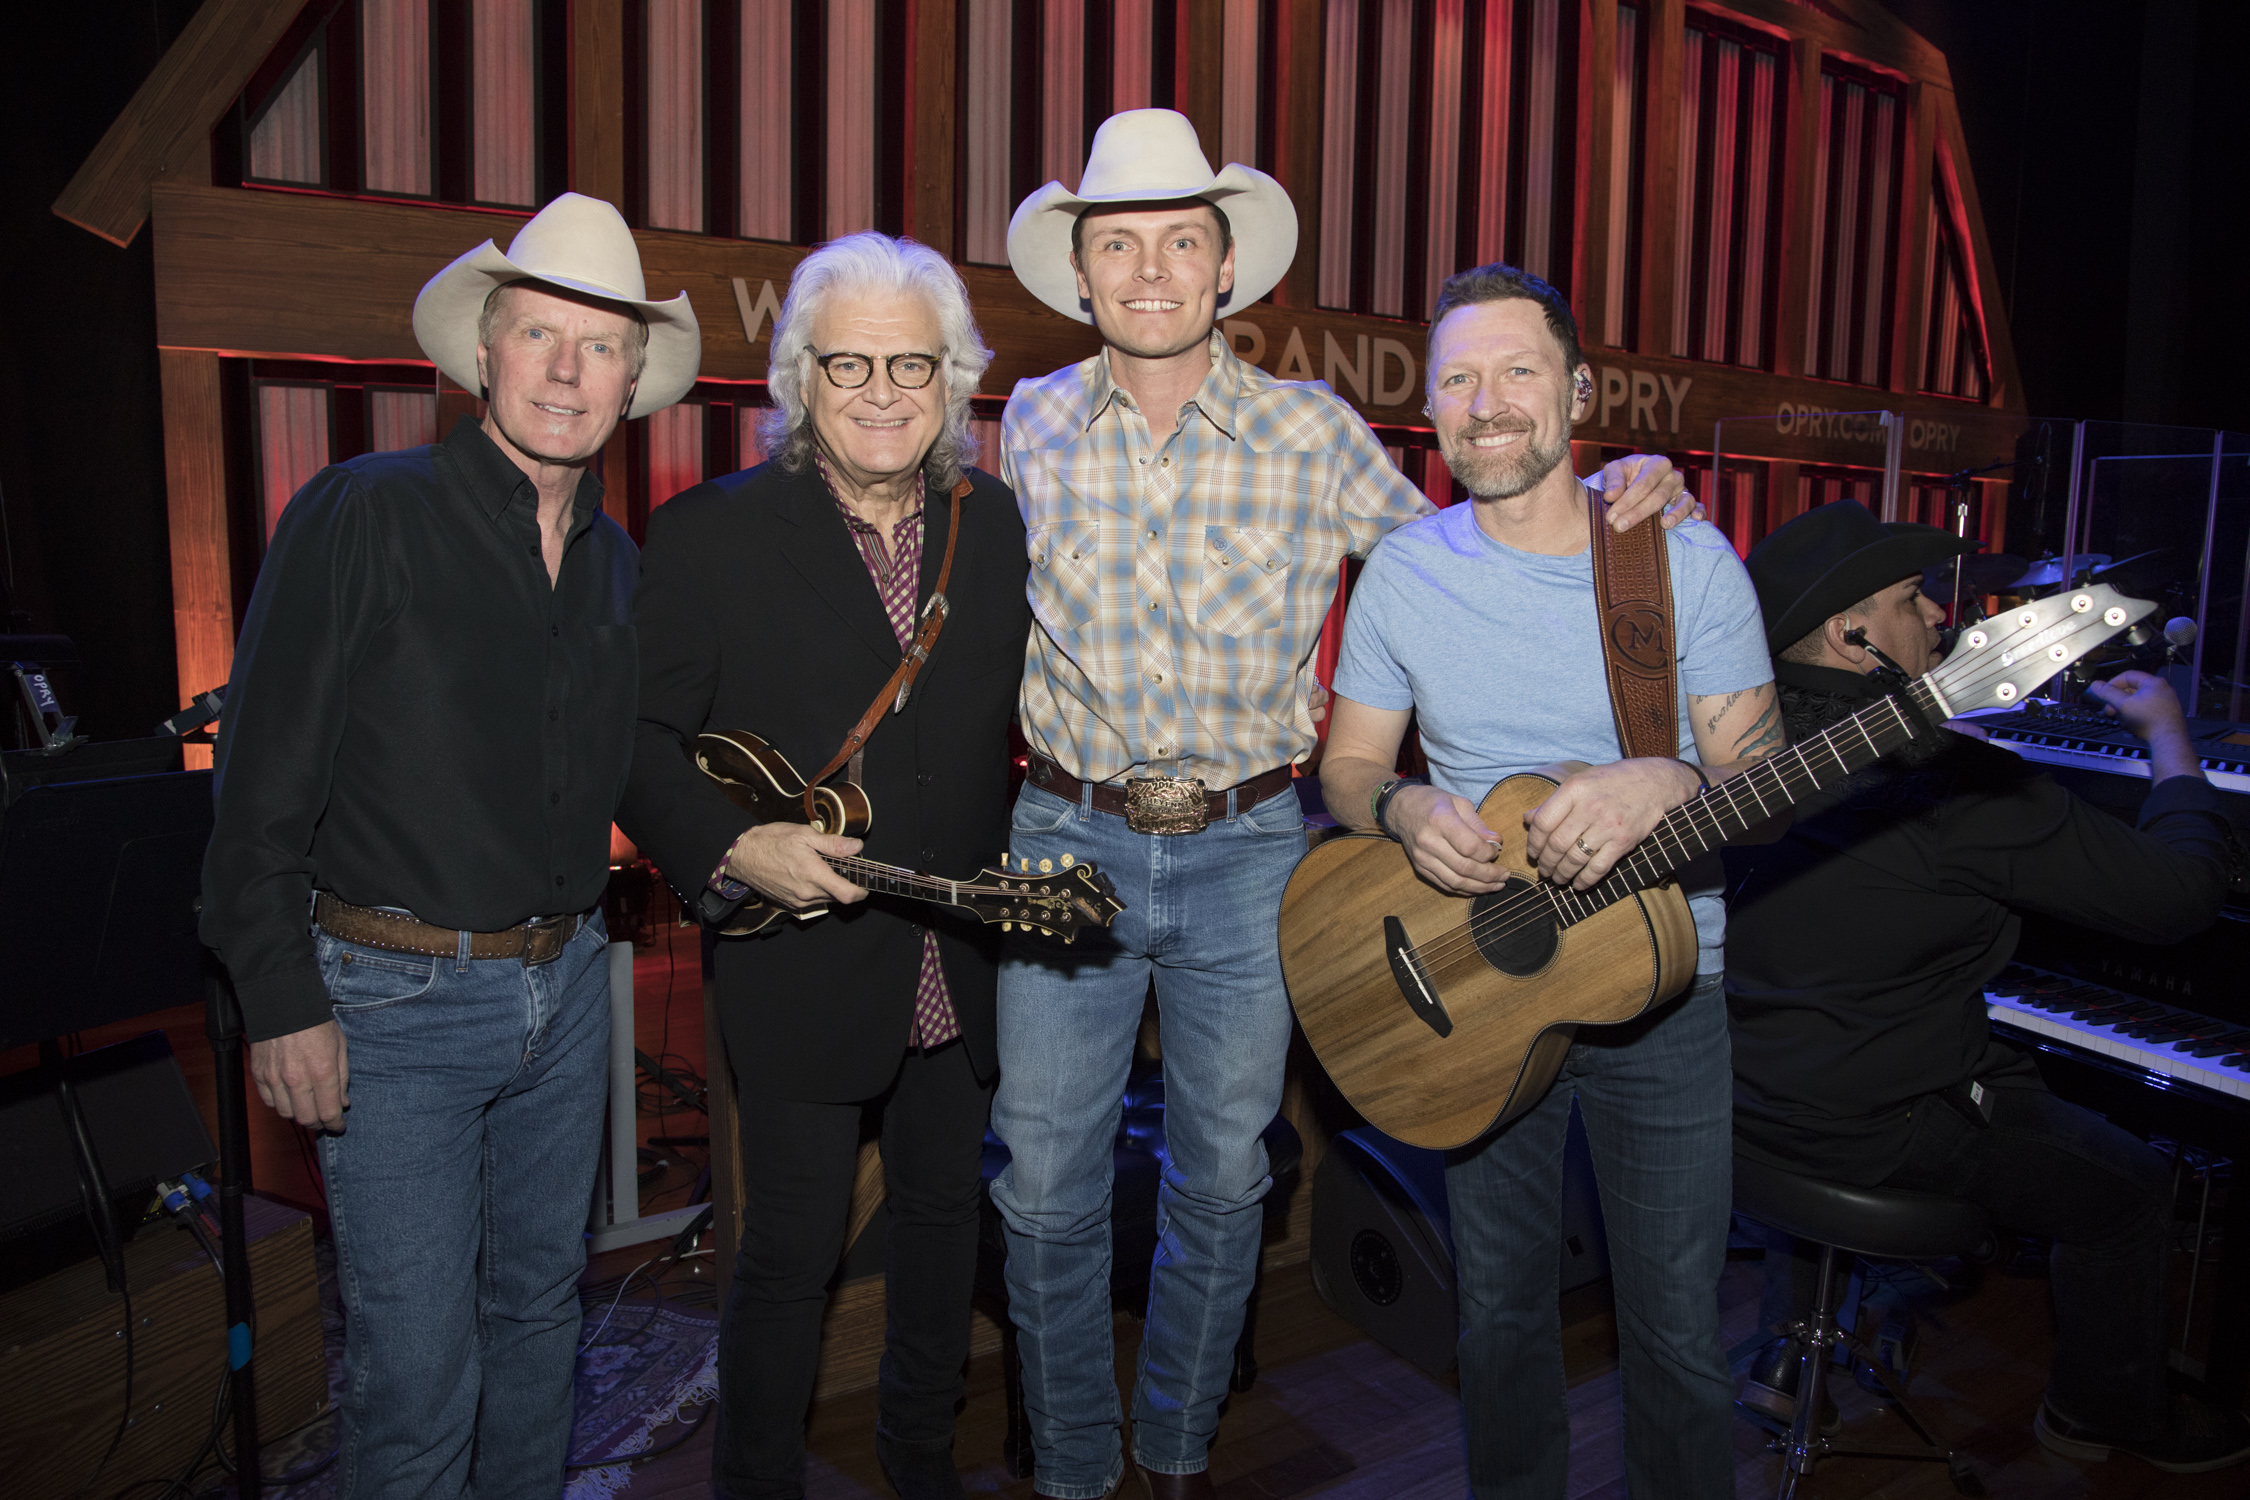 Ned LeDoux makes his Grand Ole Opry debut at the Ryman (L to R: Mark Sissel/TKO Mgmt & founding member Western Underground; Opry member Ricky Skaggs, Ned LeDoux, Opry member Craig Morgan)-Ned LeDoux DEBUT by Chris Hollo